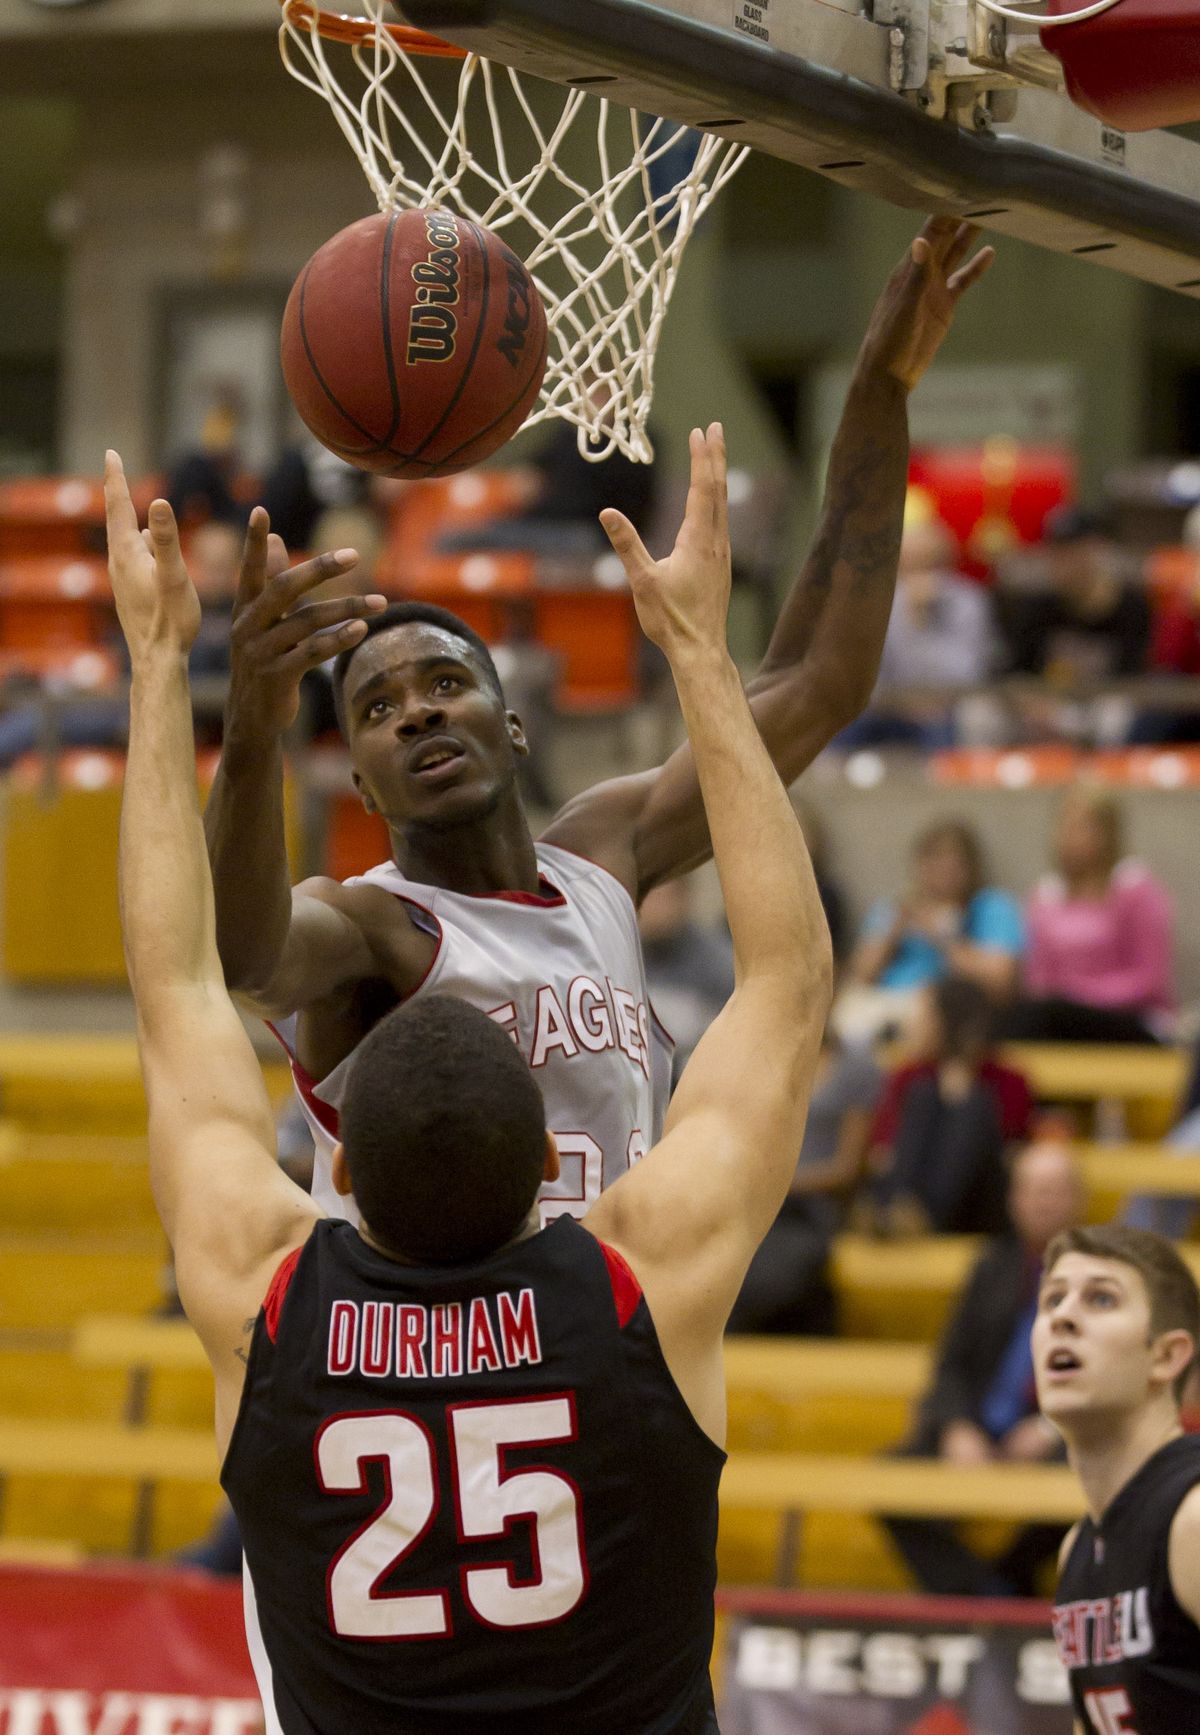 After missing his shot, Tremayne Johnson grabs the rebound over Seattle University�s Brandon Durham (25) in the first half Wednesday in Cheney. (Colin Mulvany / The Spokesman-Review)